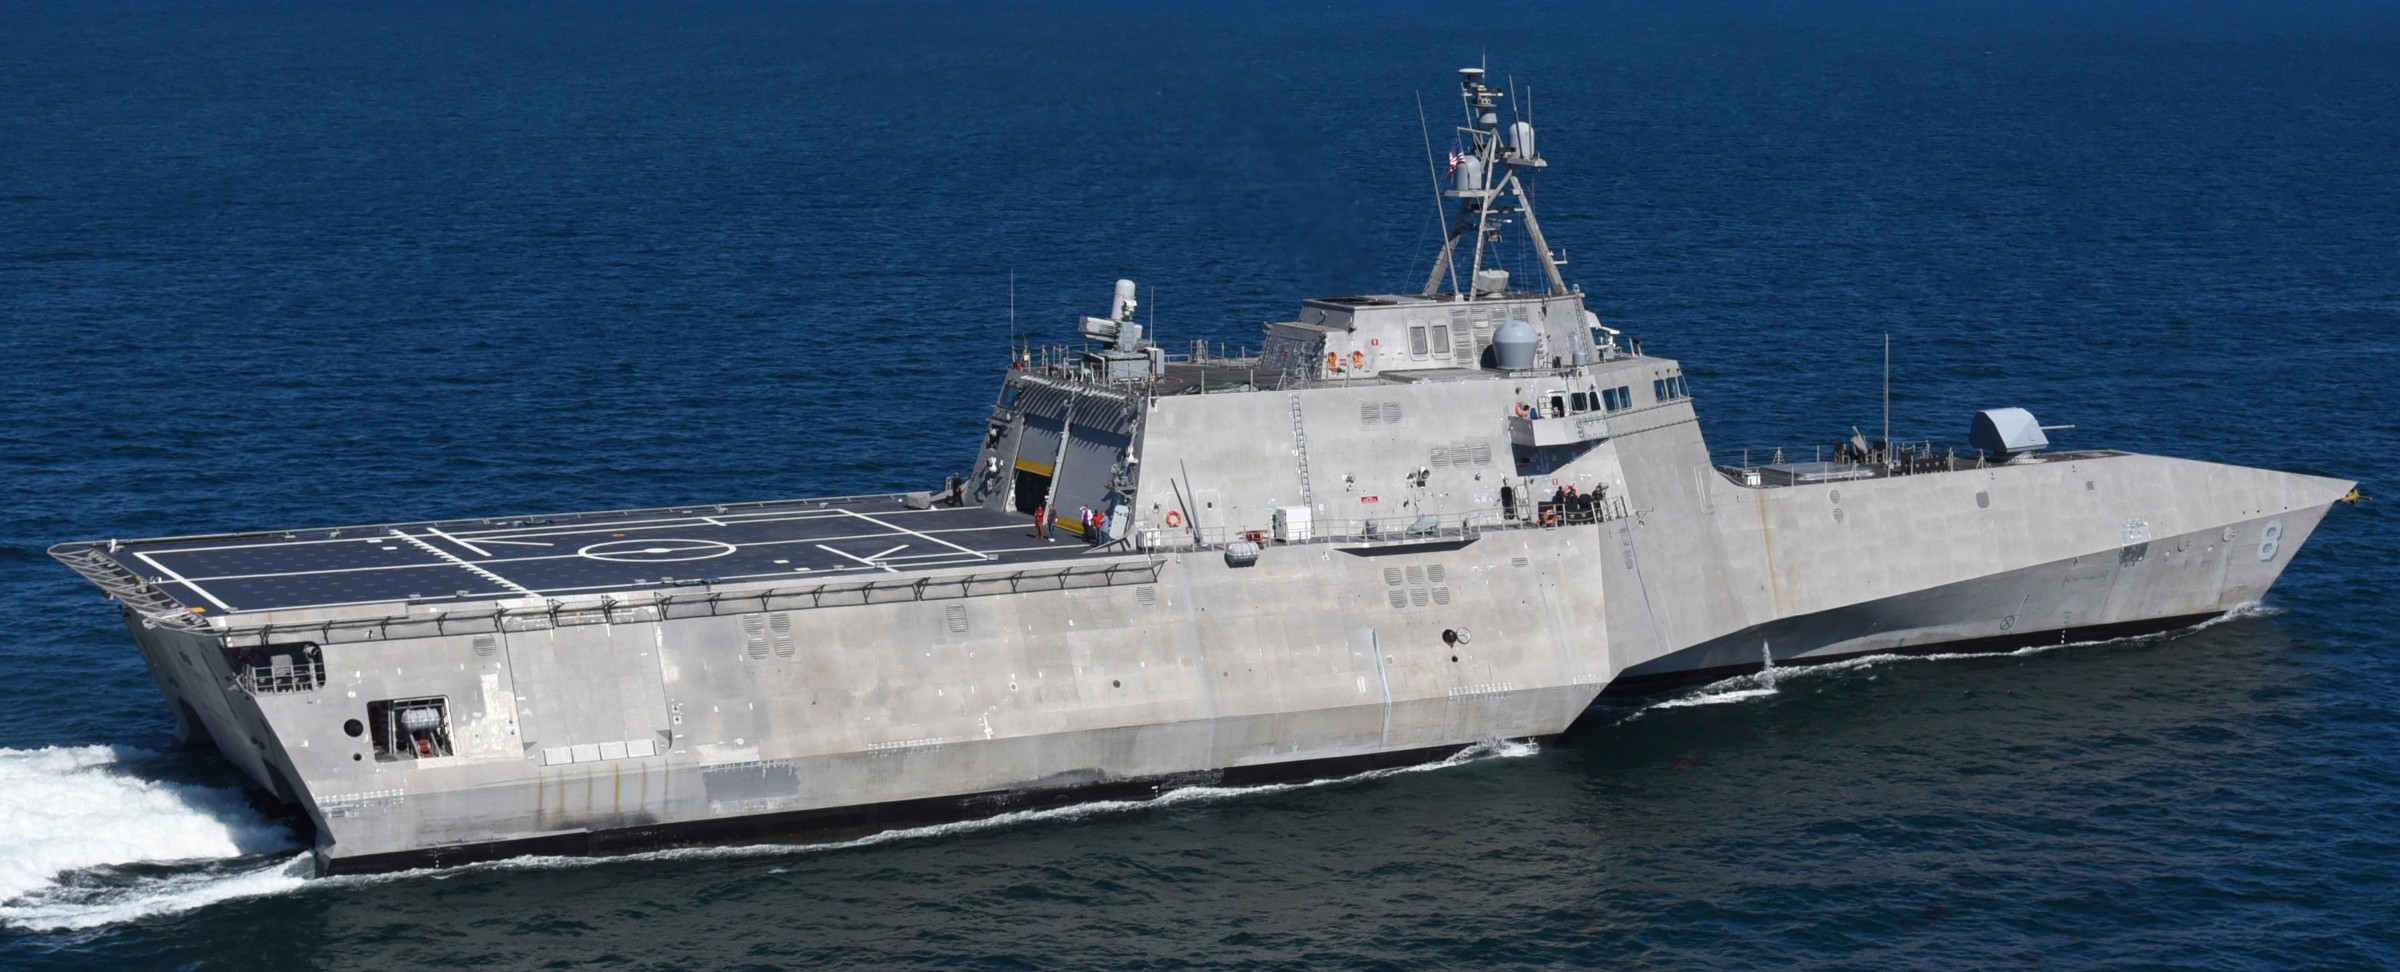 lcs-8 uss montgomery independence class littoral combat ship us navy 54